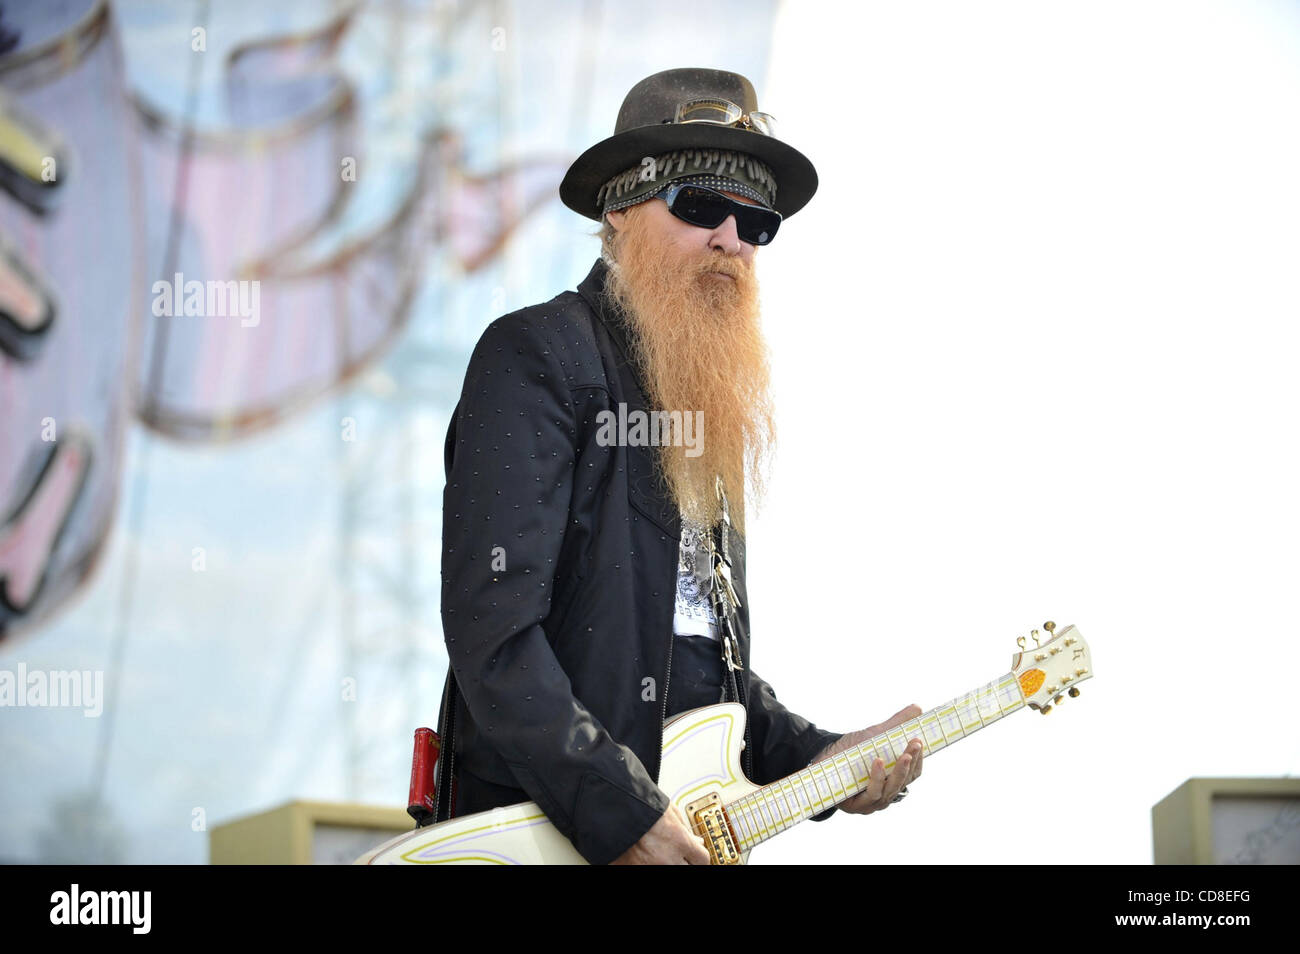 Oct 26, 2008 - Pomona, California, USA - ZZ Top singer and guitarist BILLY GIBBONS performs at the world famous Love Ride as they help celebrate the 25th anniversary as the largest 1-day motorcycle fundraiser at Fairplex in Pomona, California on October 26, 2008. (Credit Image: © Steven K. Doi/ZUMA  Stock Photo